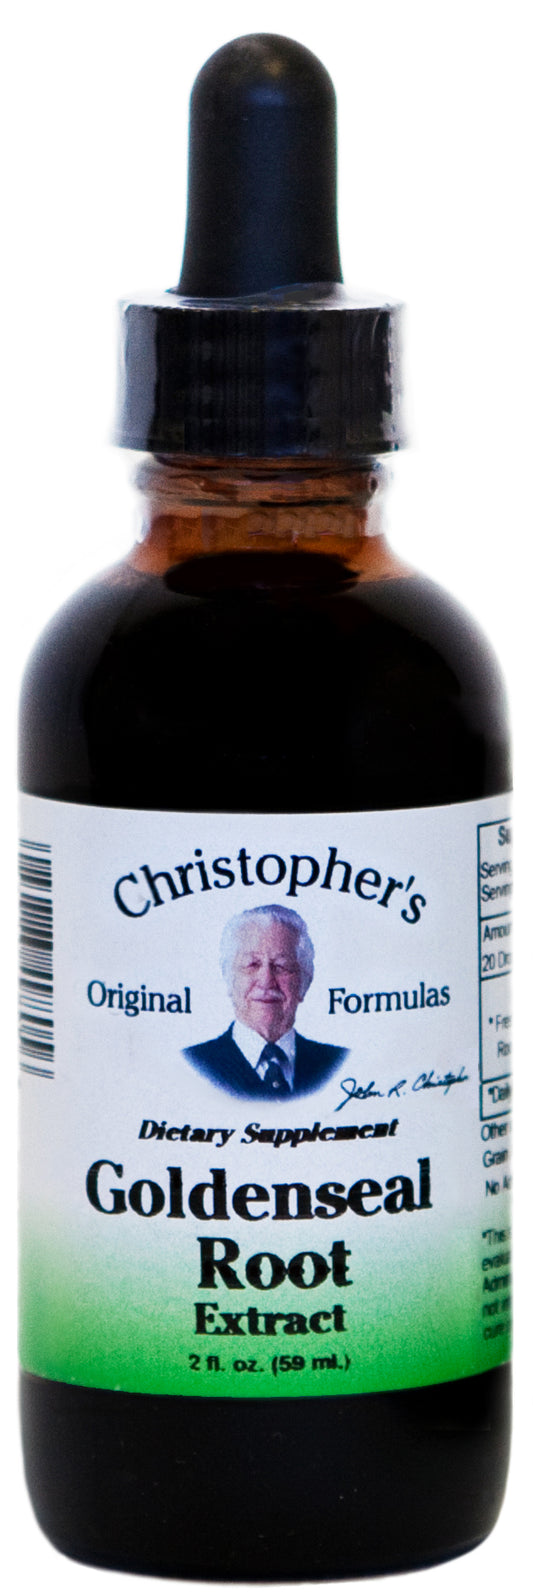 Dr. Christopher's Goldenseal Root Glycerine Extract